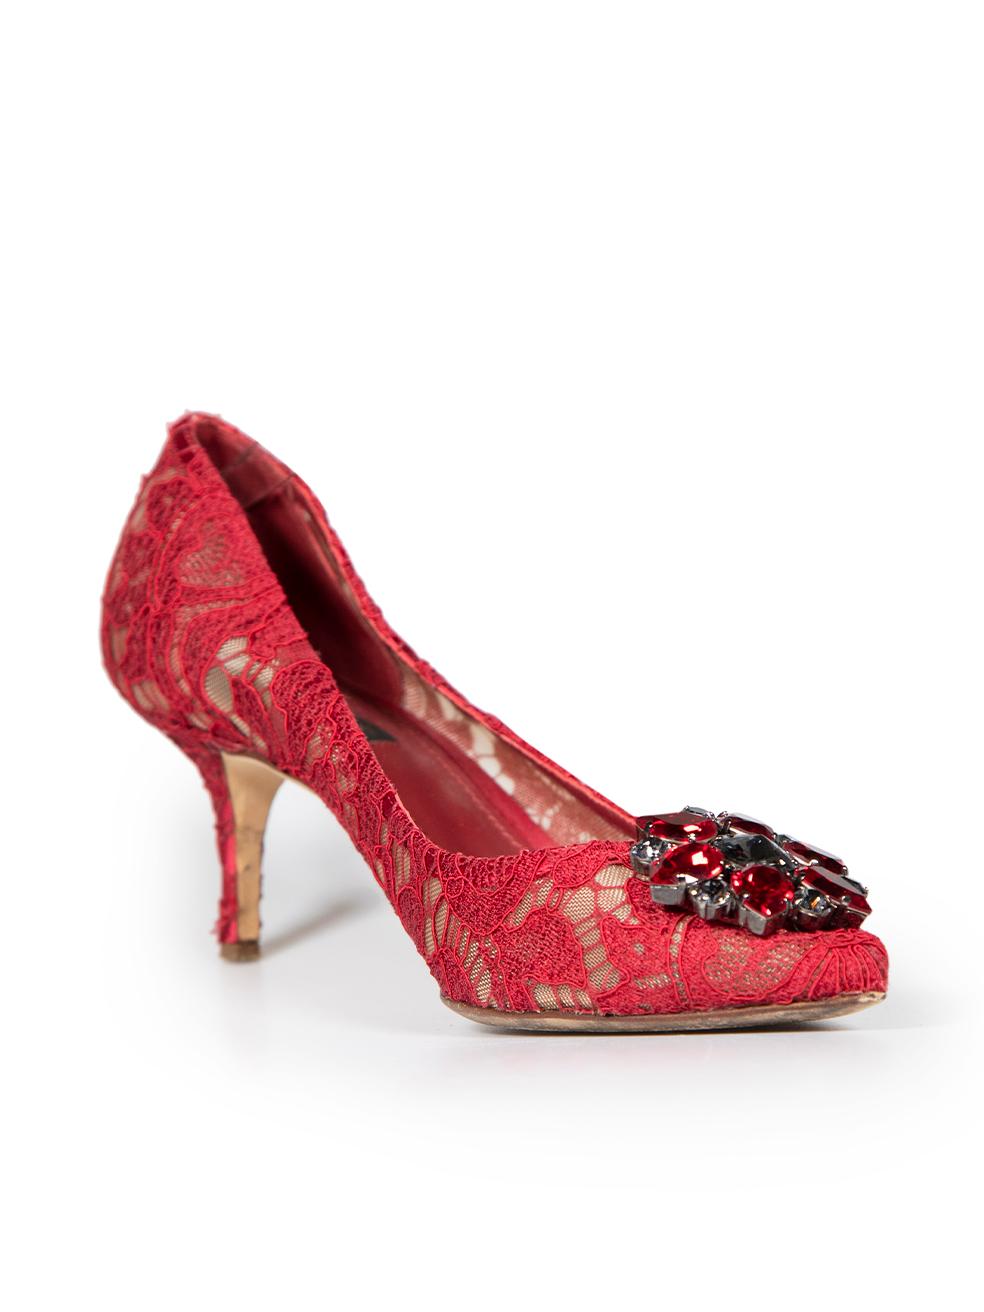 CONDITION is Good. Minor wear to shoes is evident. Light wear to the lace of both shoes with slight unravelling and the left-side of the right shoe has residue stuck to the sole on this used Dolce & Gabbana designer resale item.
 
 
 
 Details
 
 
